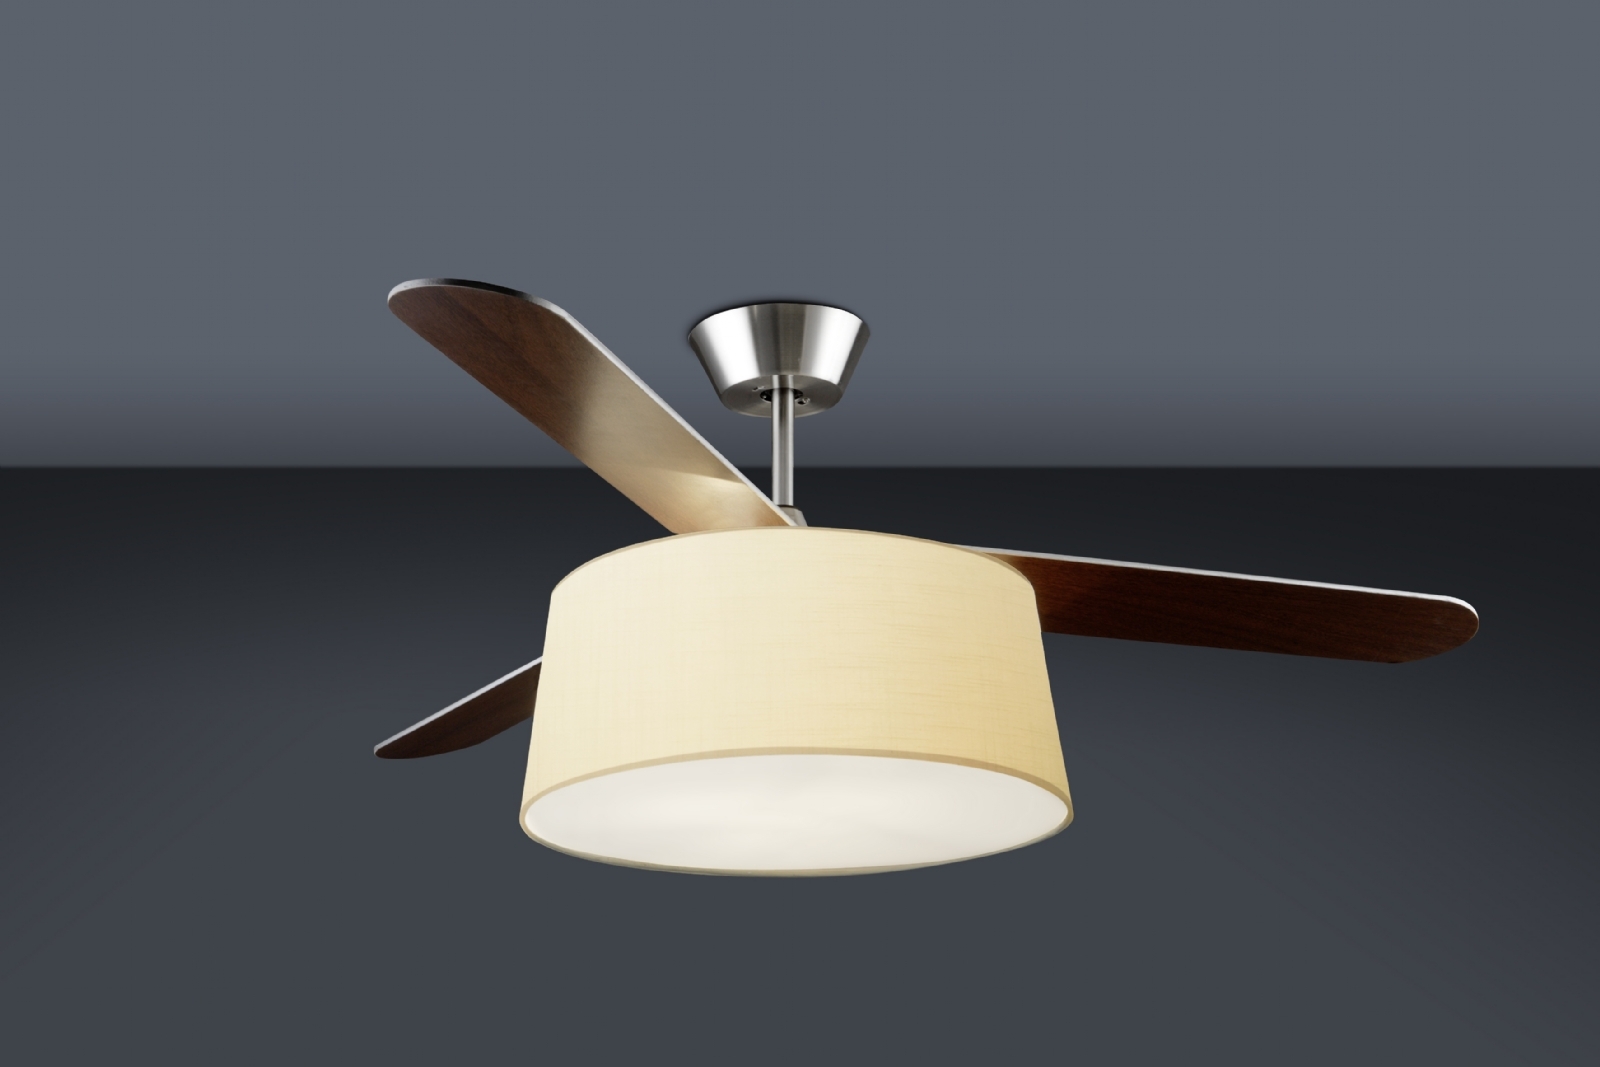 Permalink to Small Ceiling Fans With Bright Lights